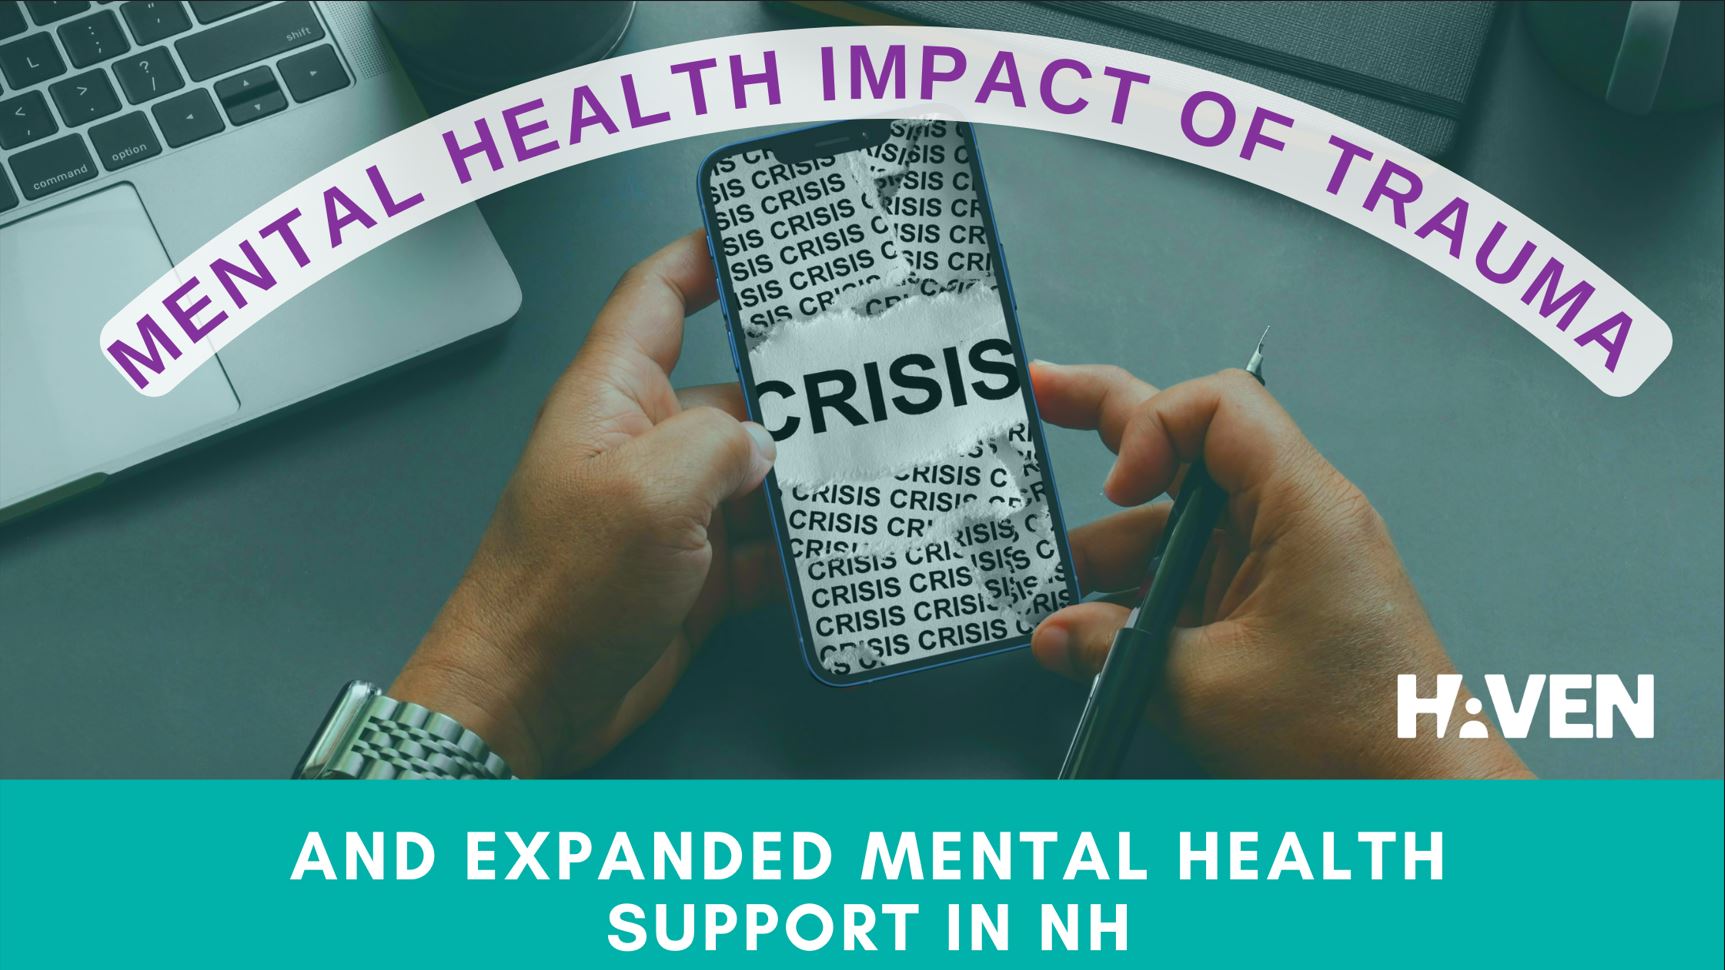 New Hampshire Expands Mental Health Supports to Address Statewide Crisis